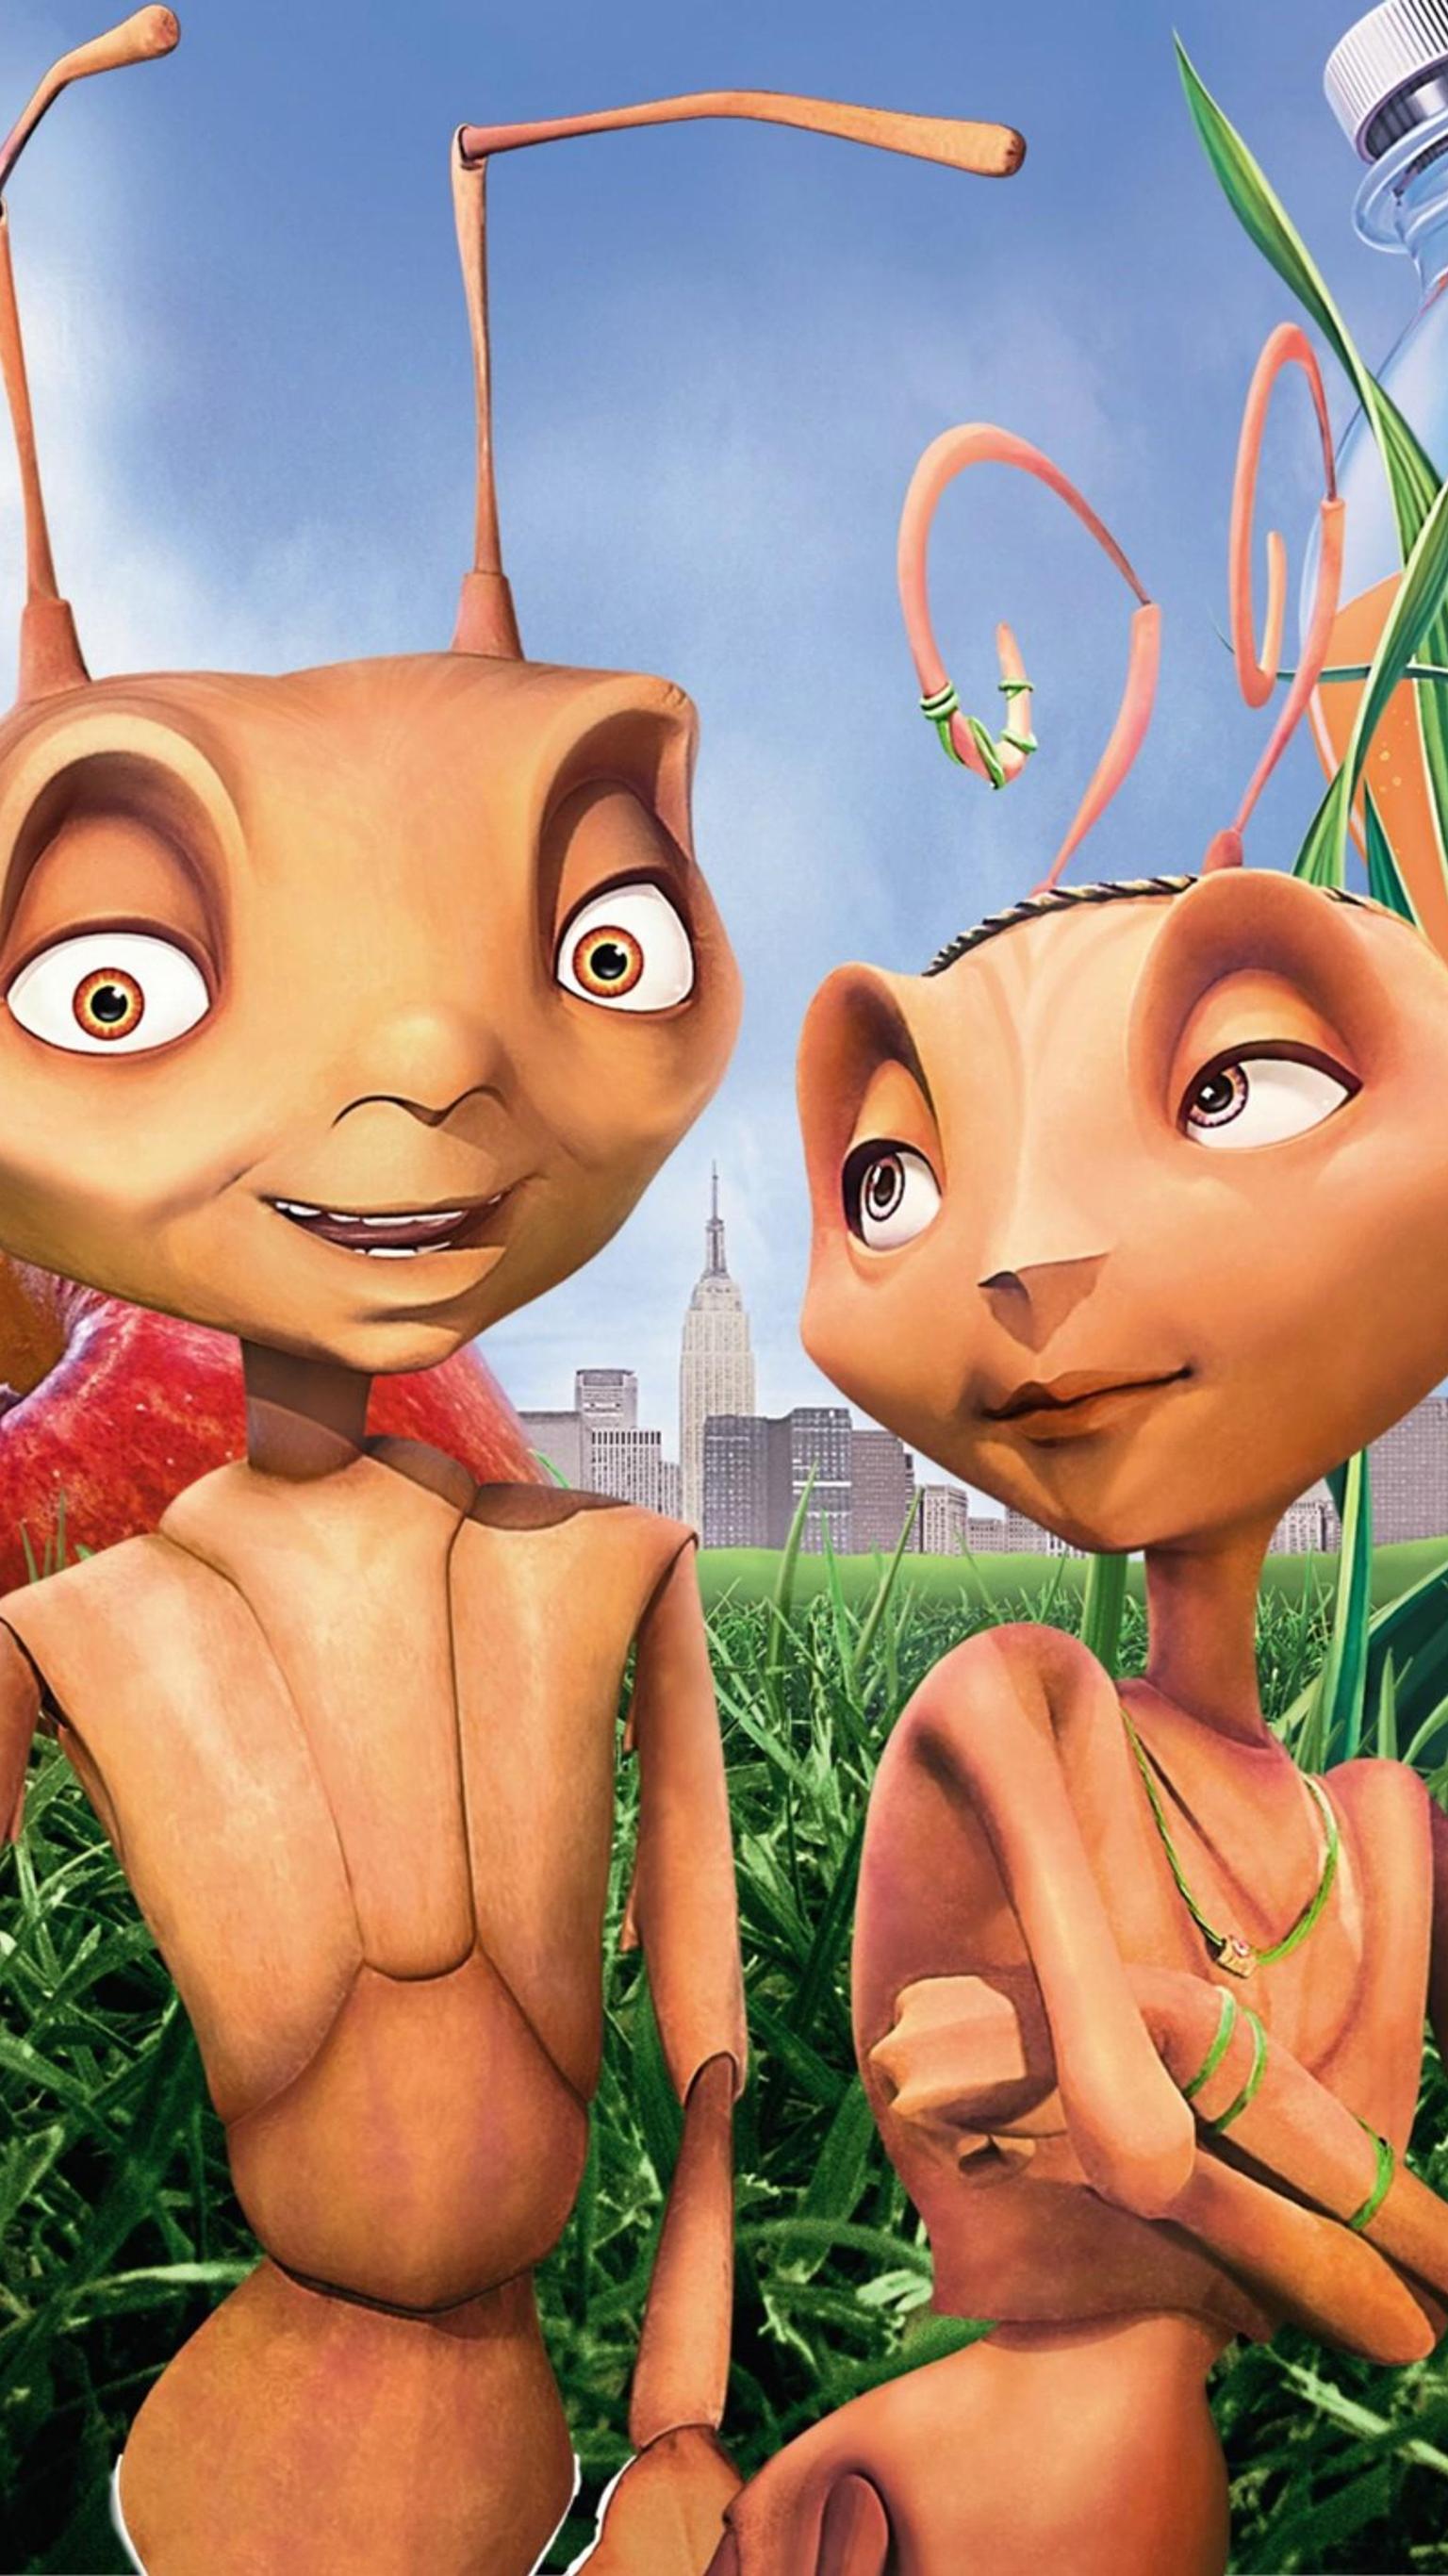 Why Pixar's 'A Bug's Life' Vs. 'Antz' Was a Thing